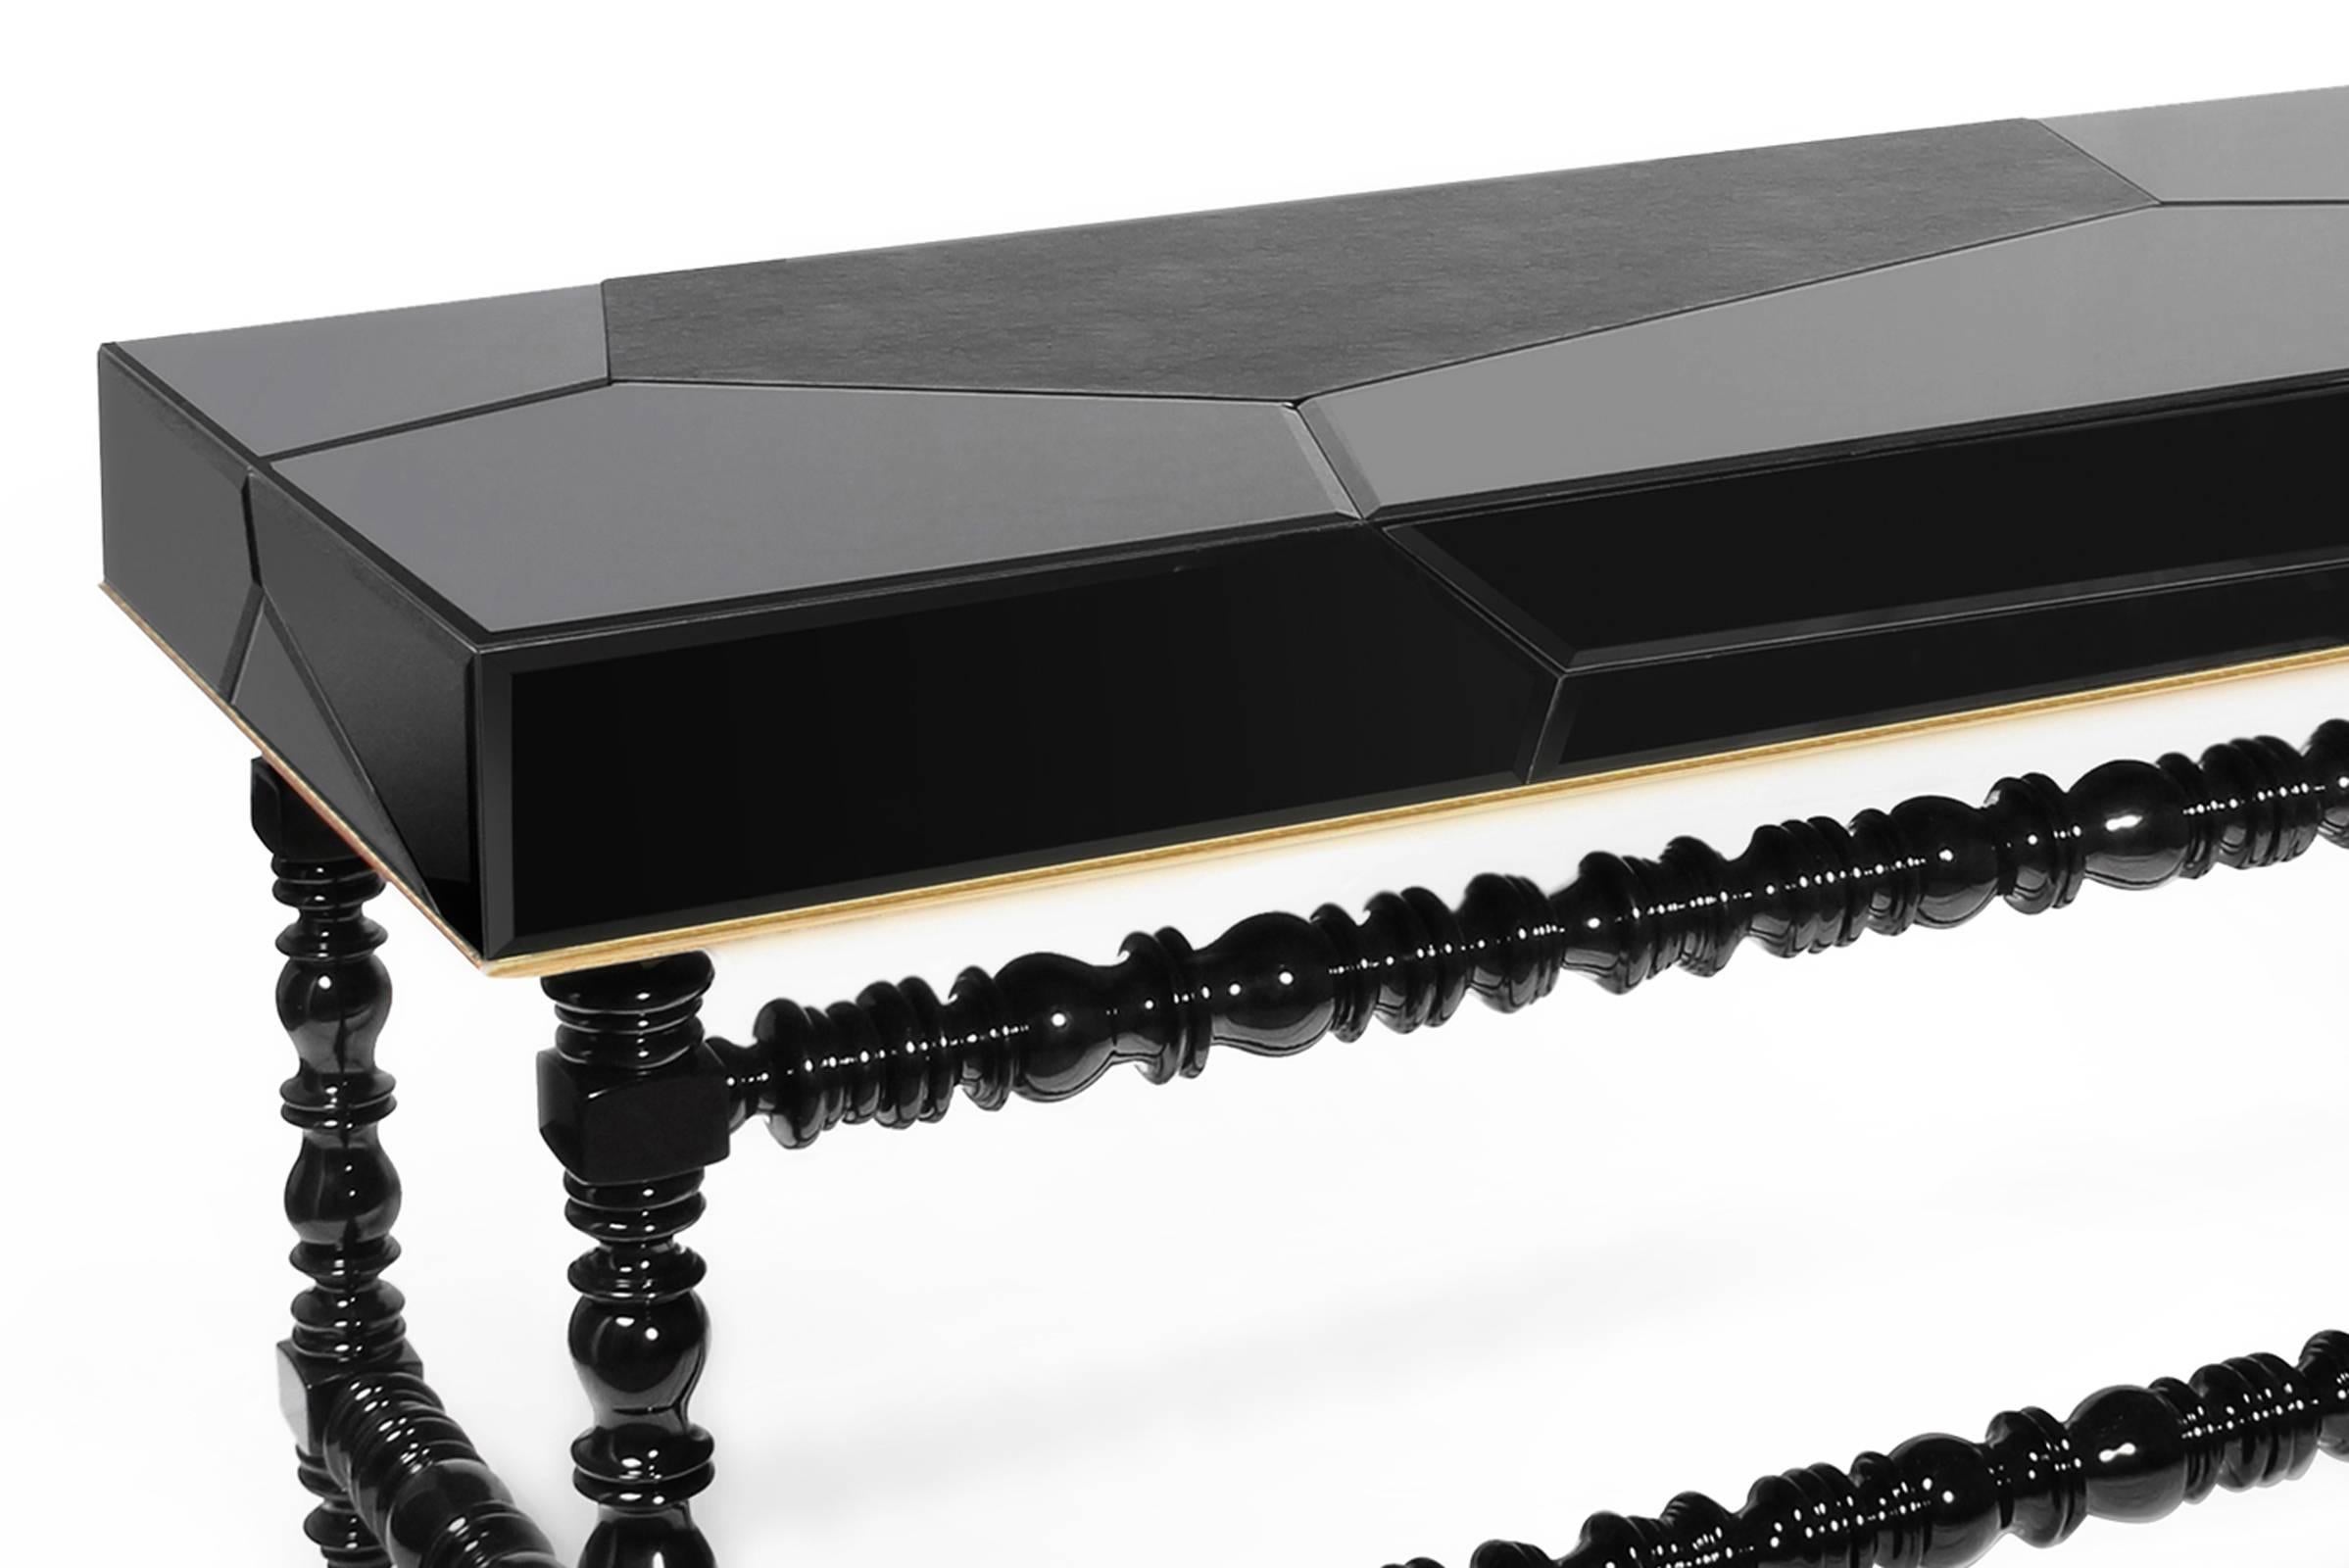 Desk queen with black lacquered mirror and leather top.
Black lacquered high gloss varnished base. Contains three
drawers and golden leaf details.


   